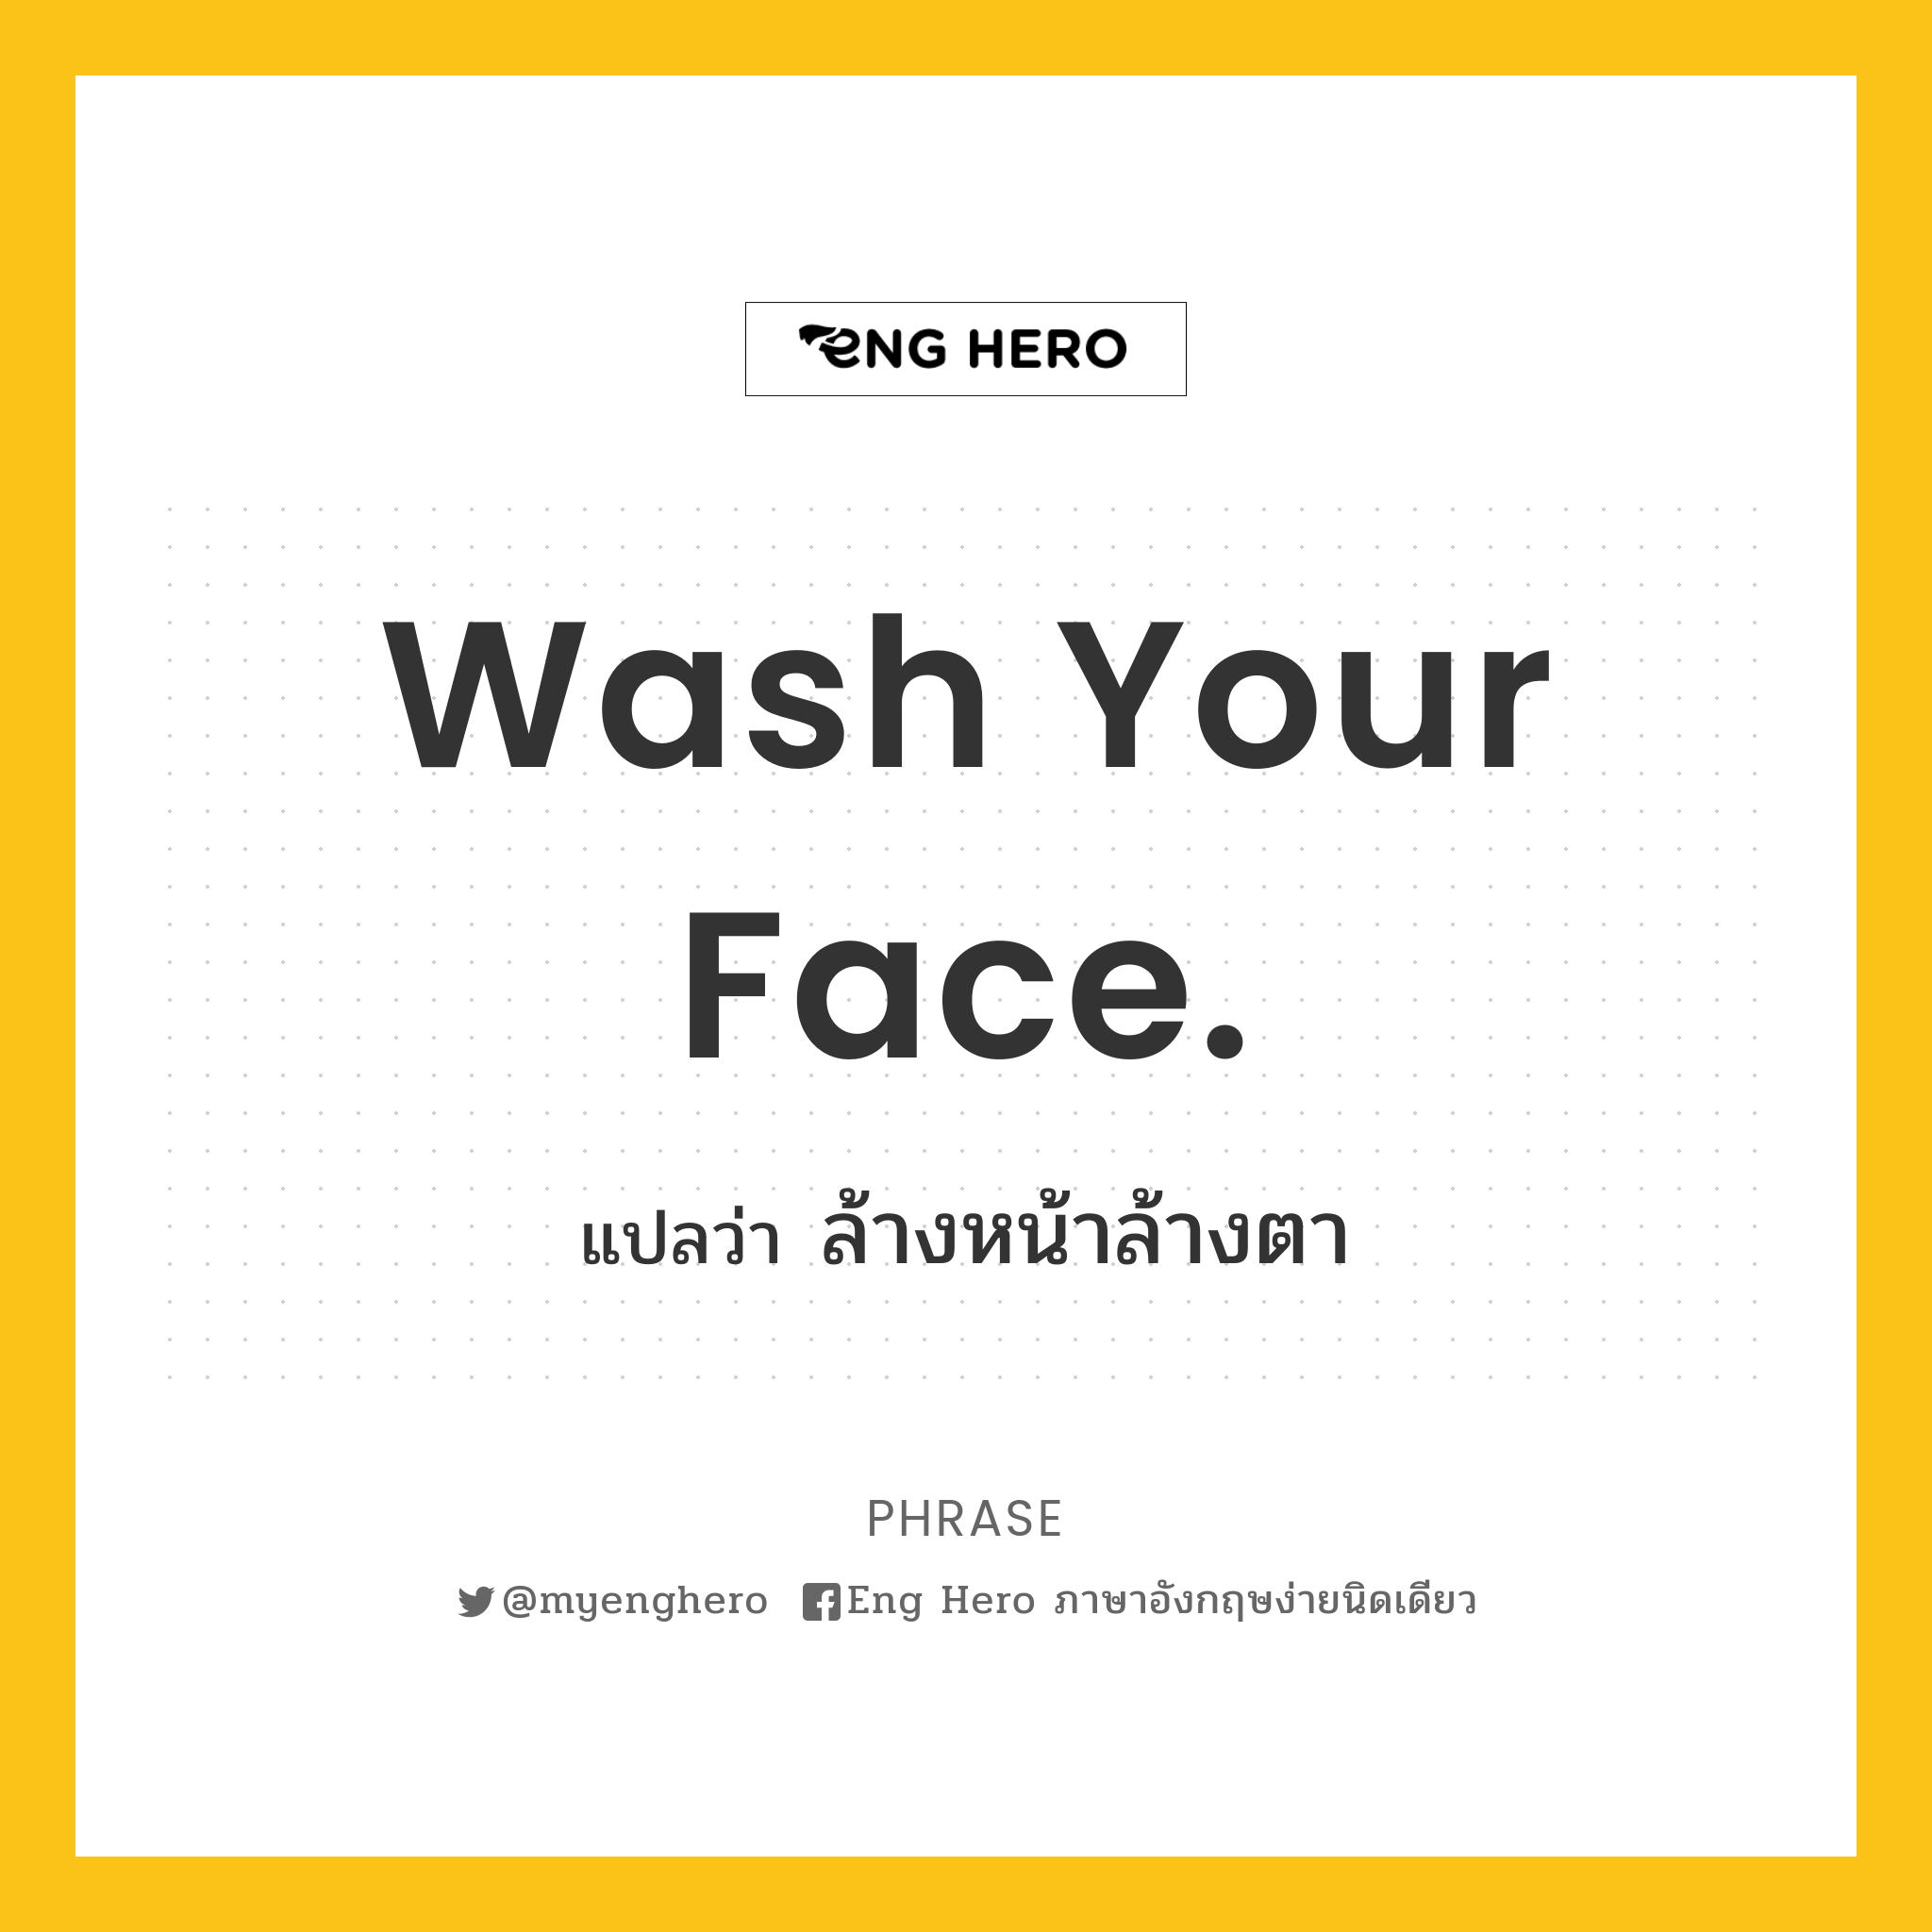 Wash your face.